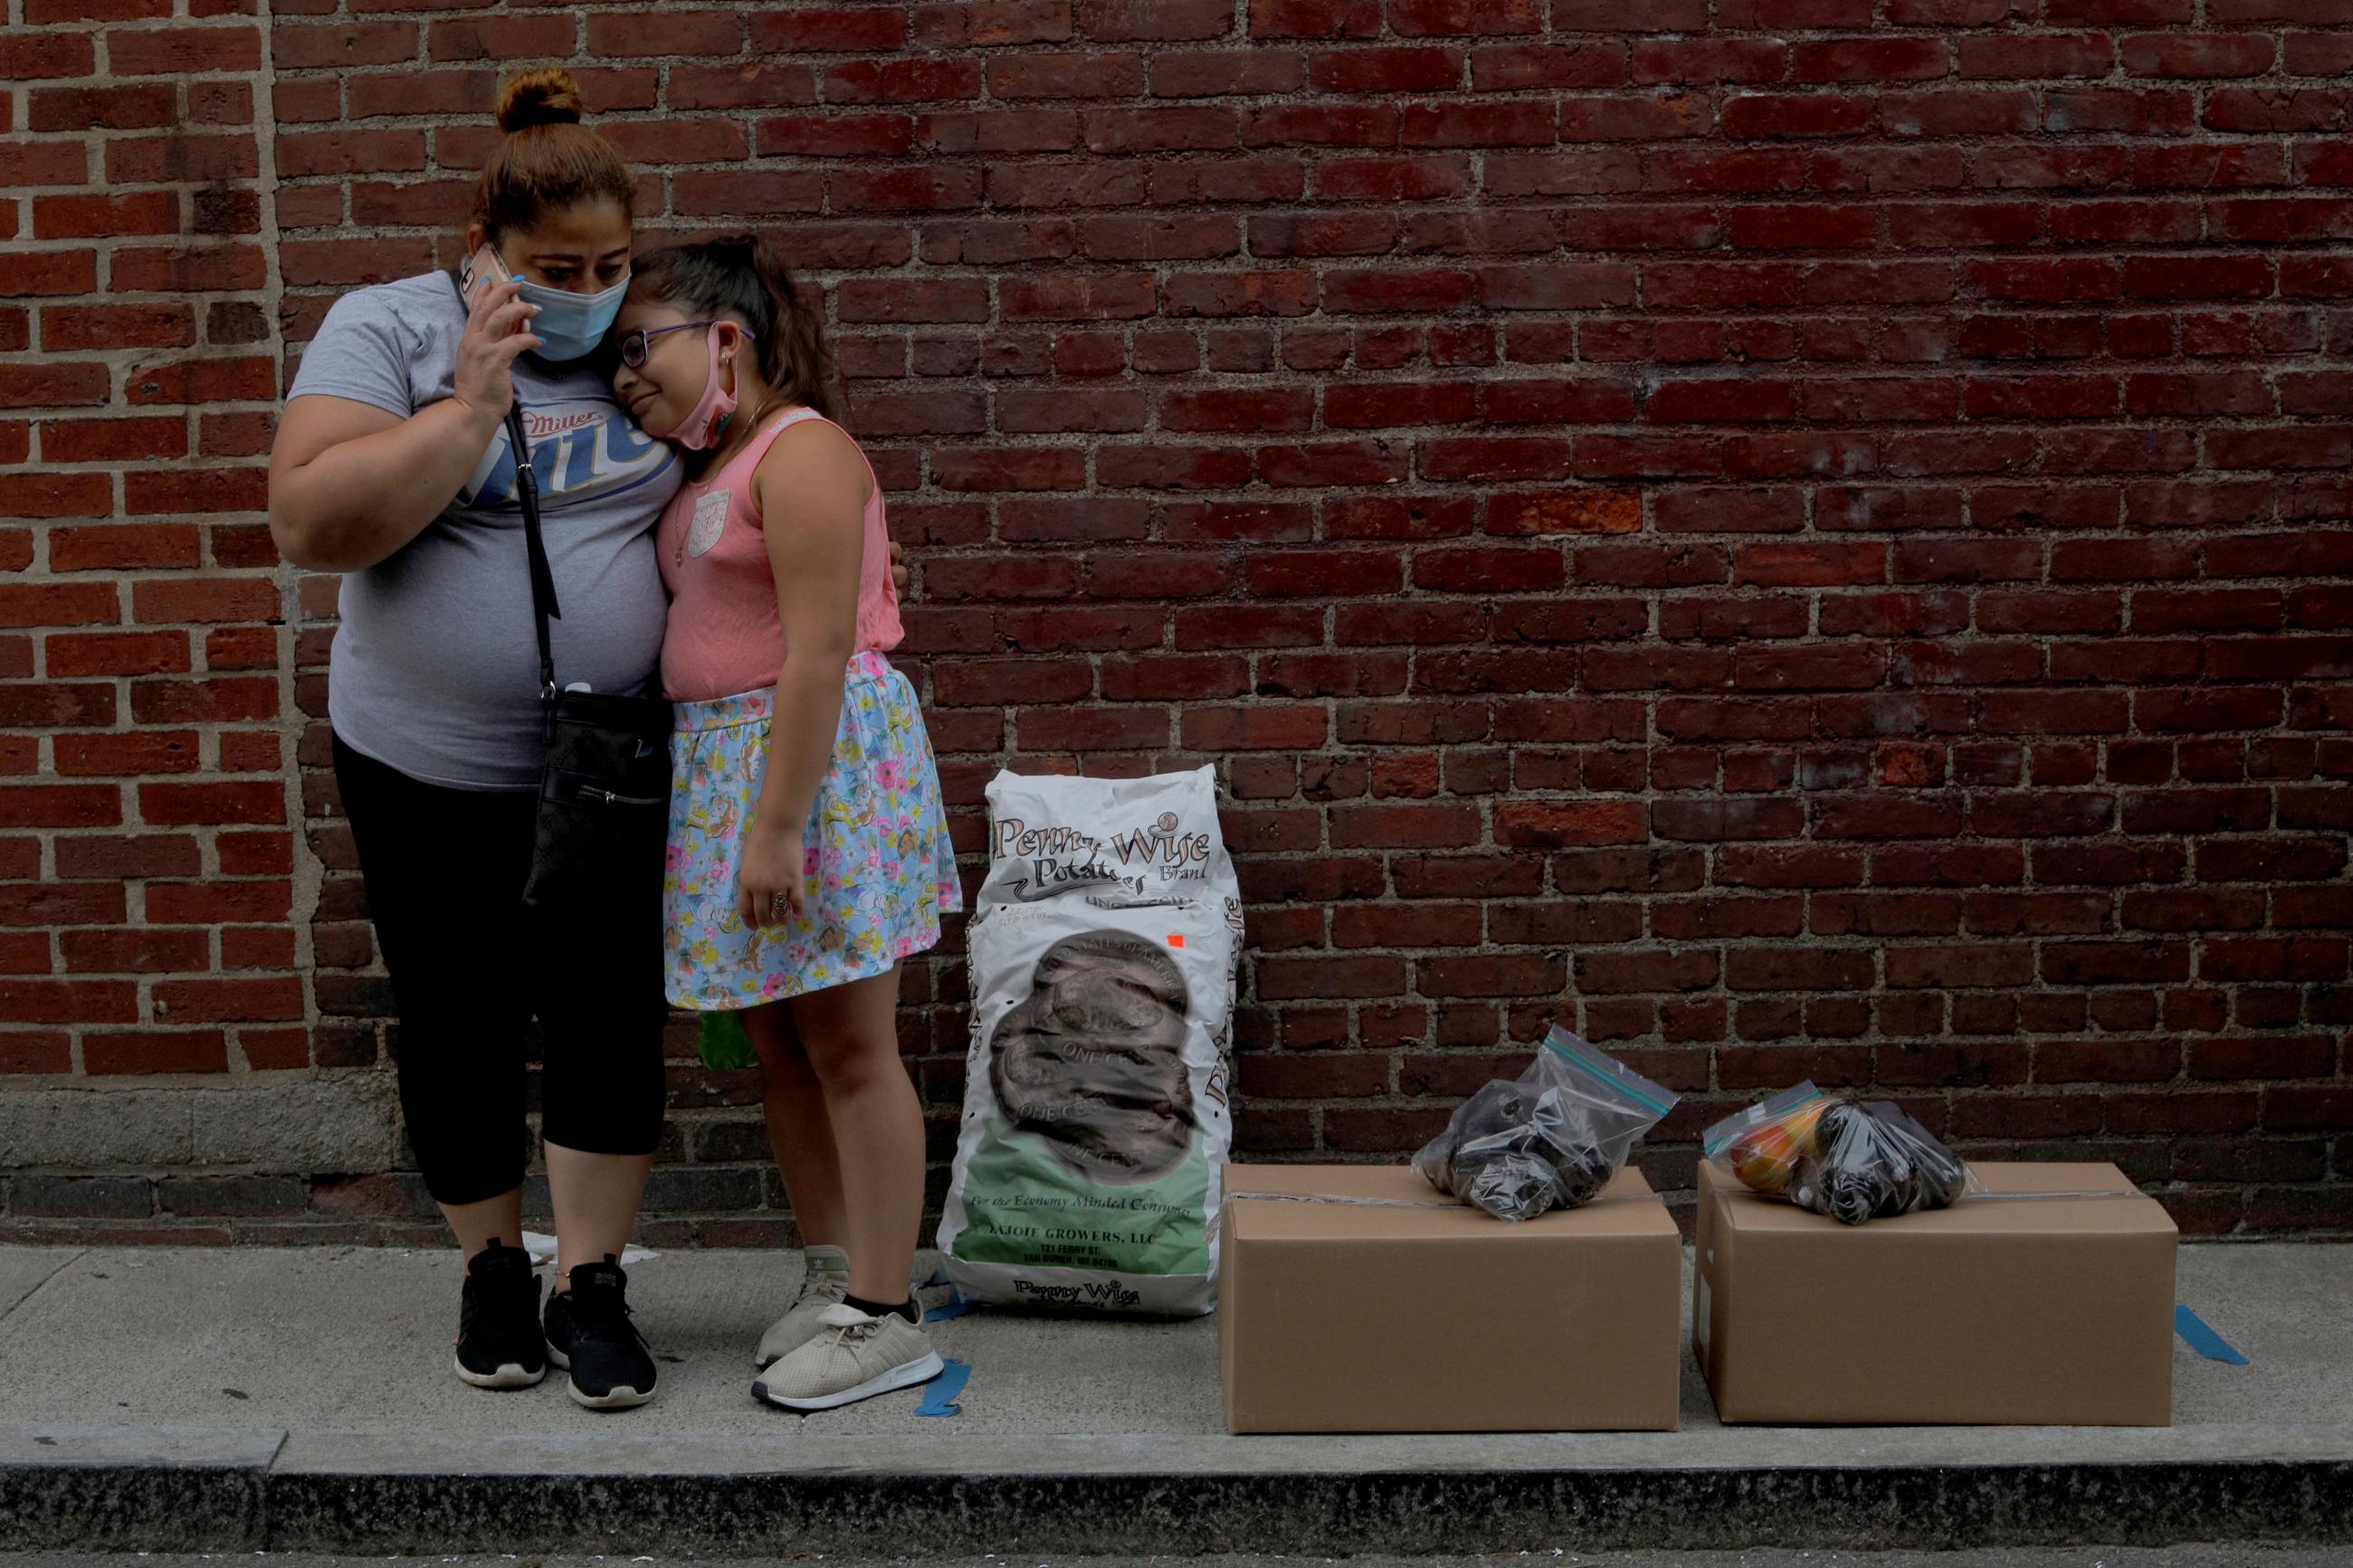 Sandra Cruz, who lost her job because of the coronavirus disease (COVID-19) outbreak, and fell four months behind on her rent and is fearing eviction, and her daughter Gabriella wait for a ride after picking up free groceries distributed by the Chelsea Collaborative in Chelsea, Massachusetts, U.S., July 22, 2020.